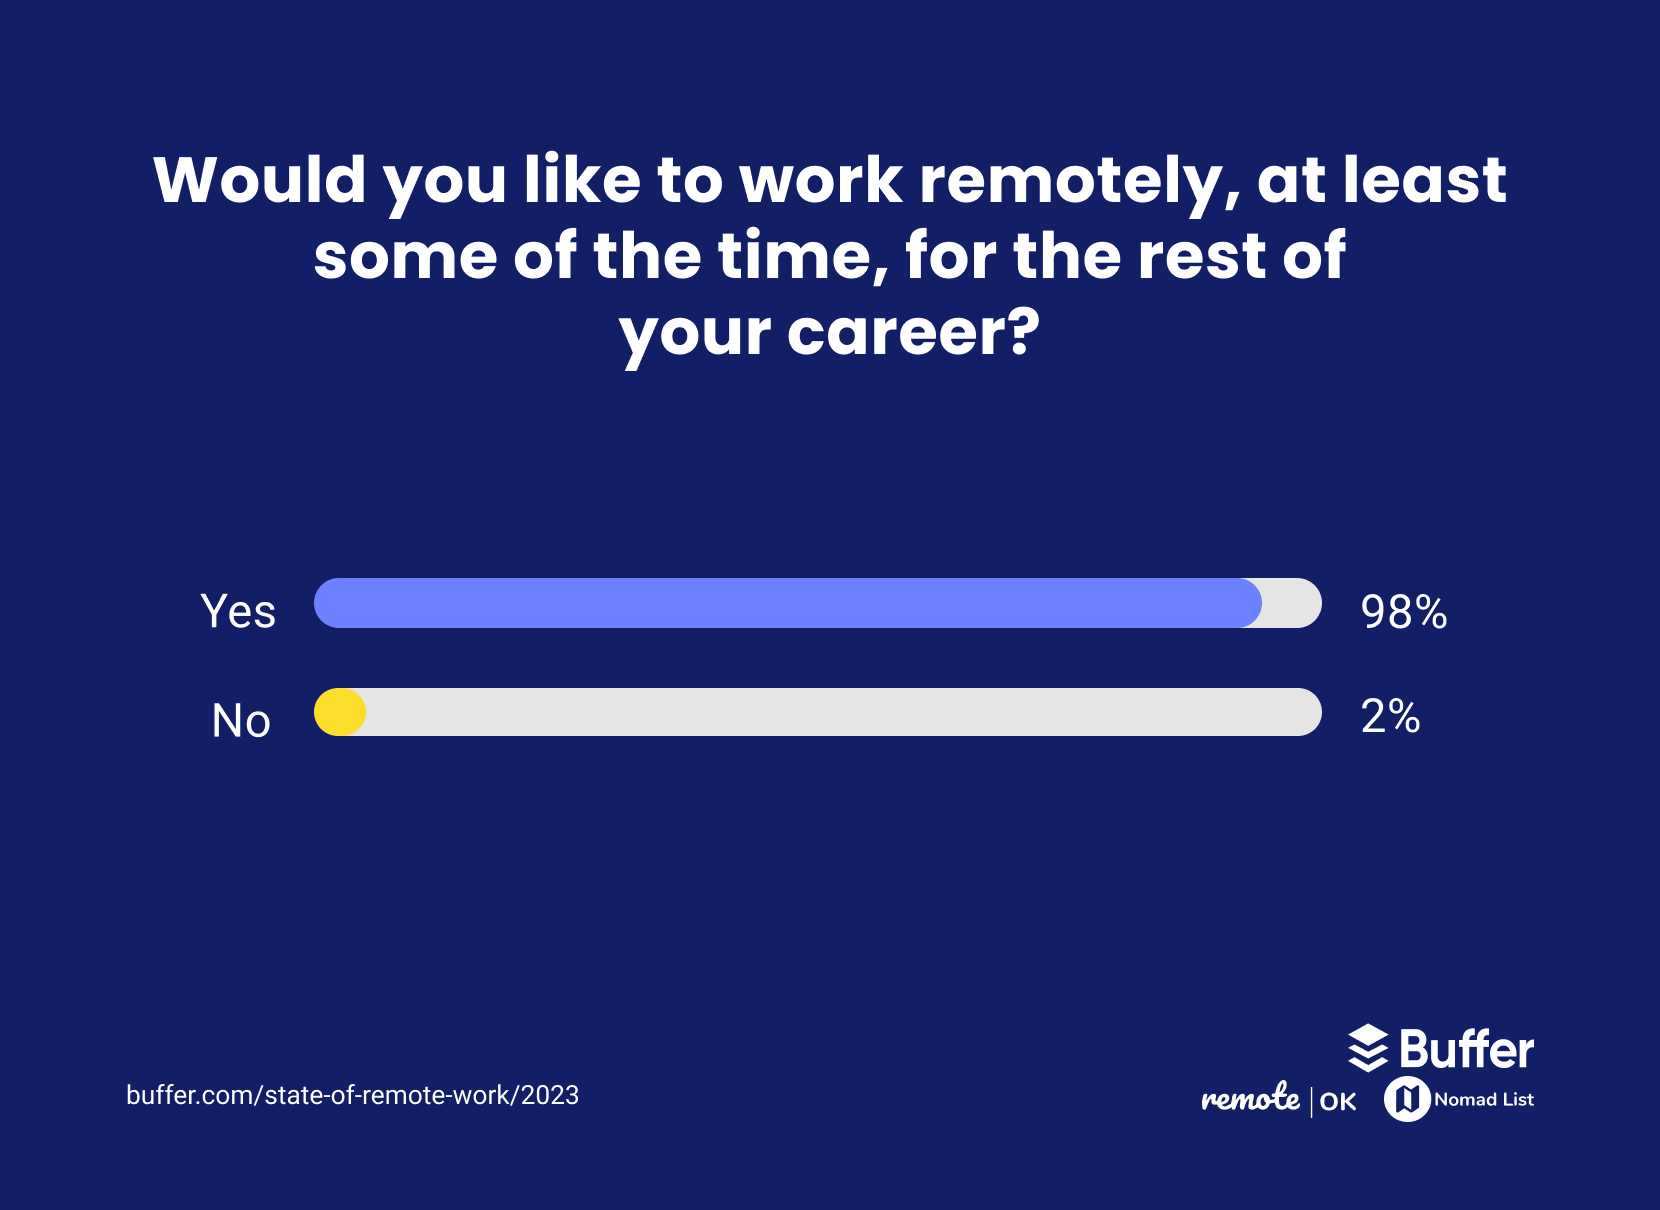 Key Insights from The 2023 State of Remote Work